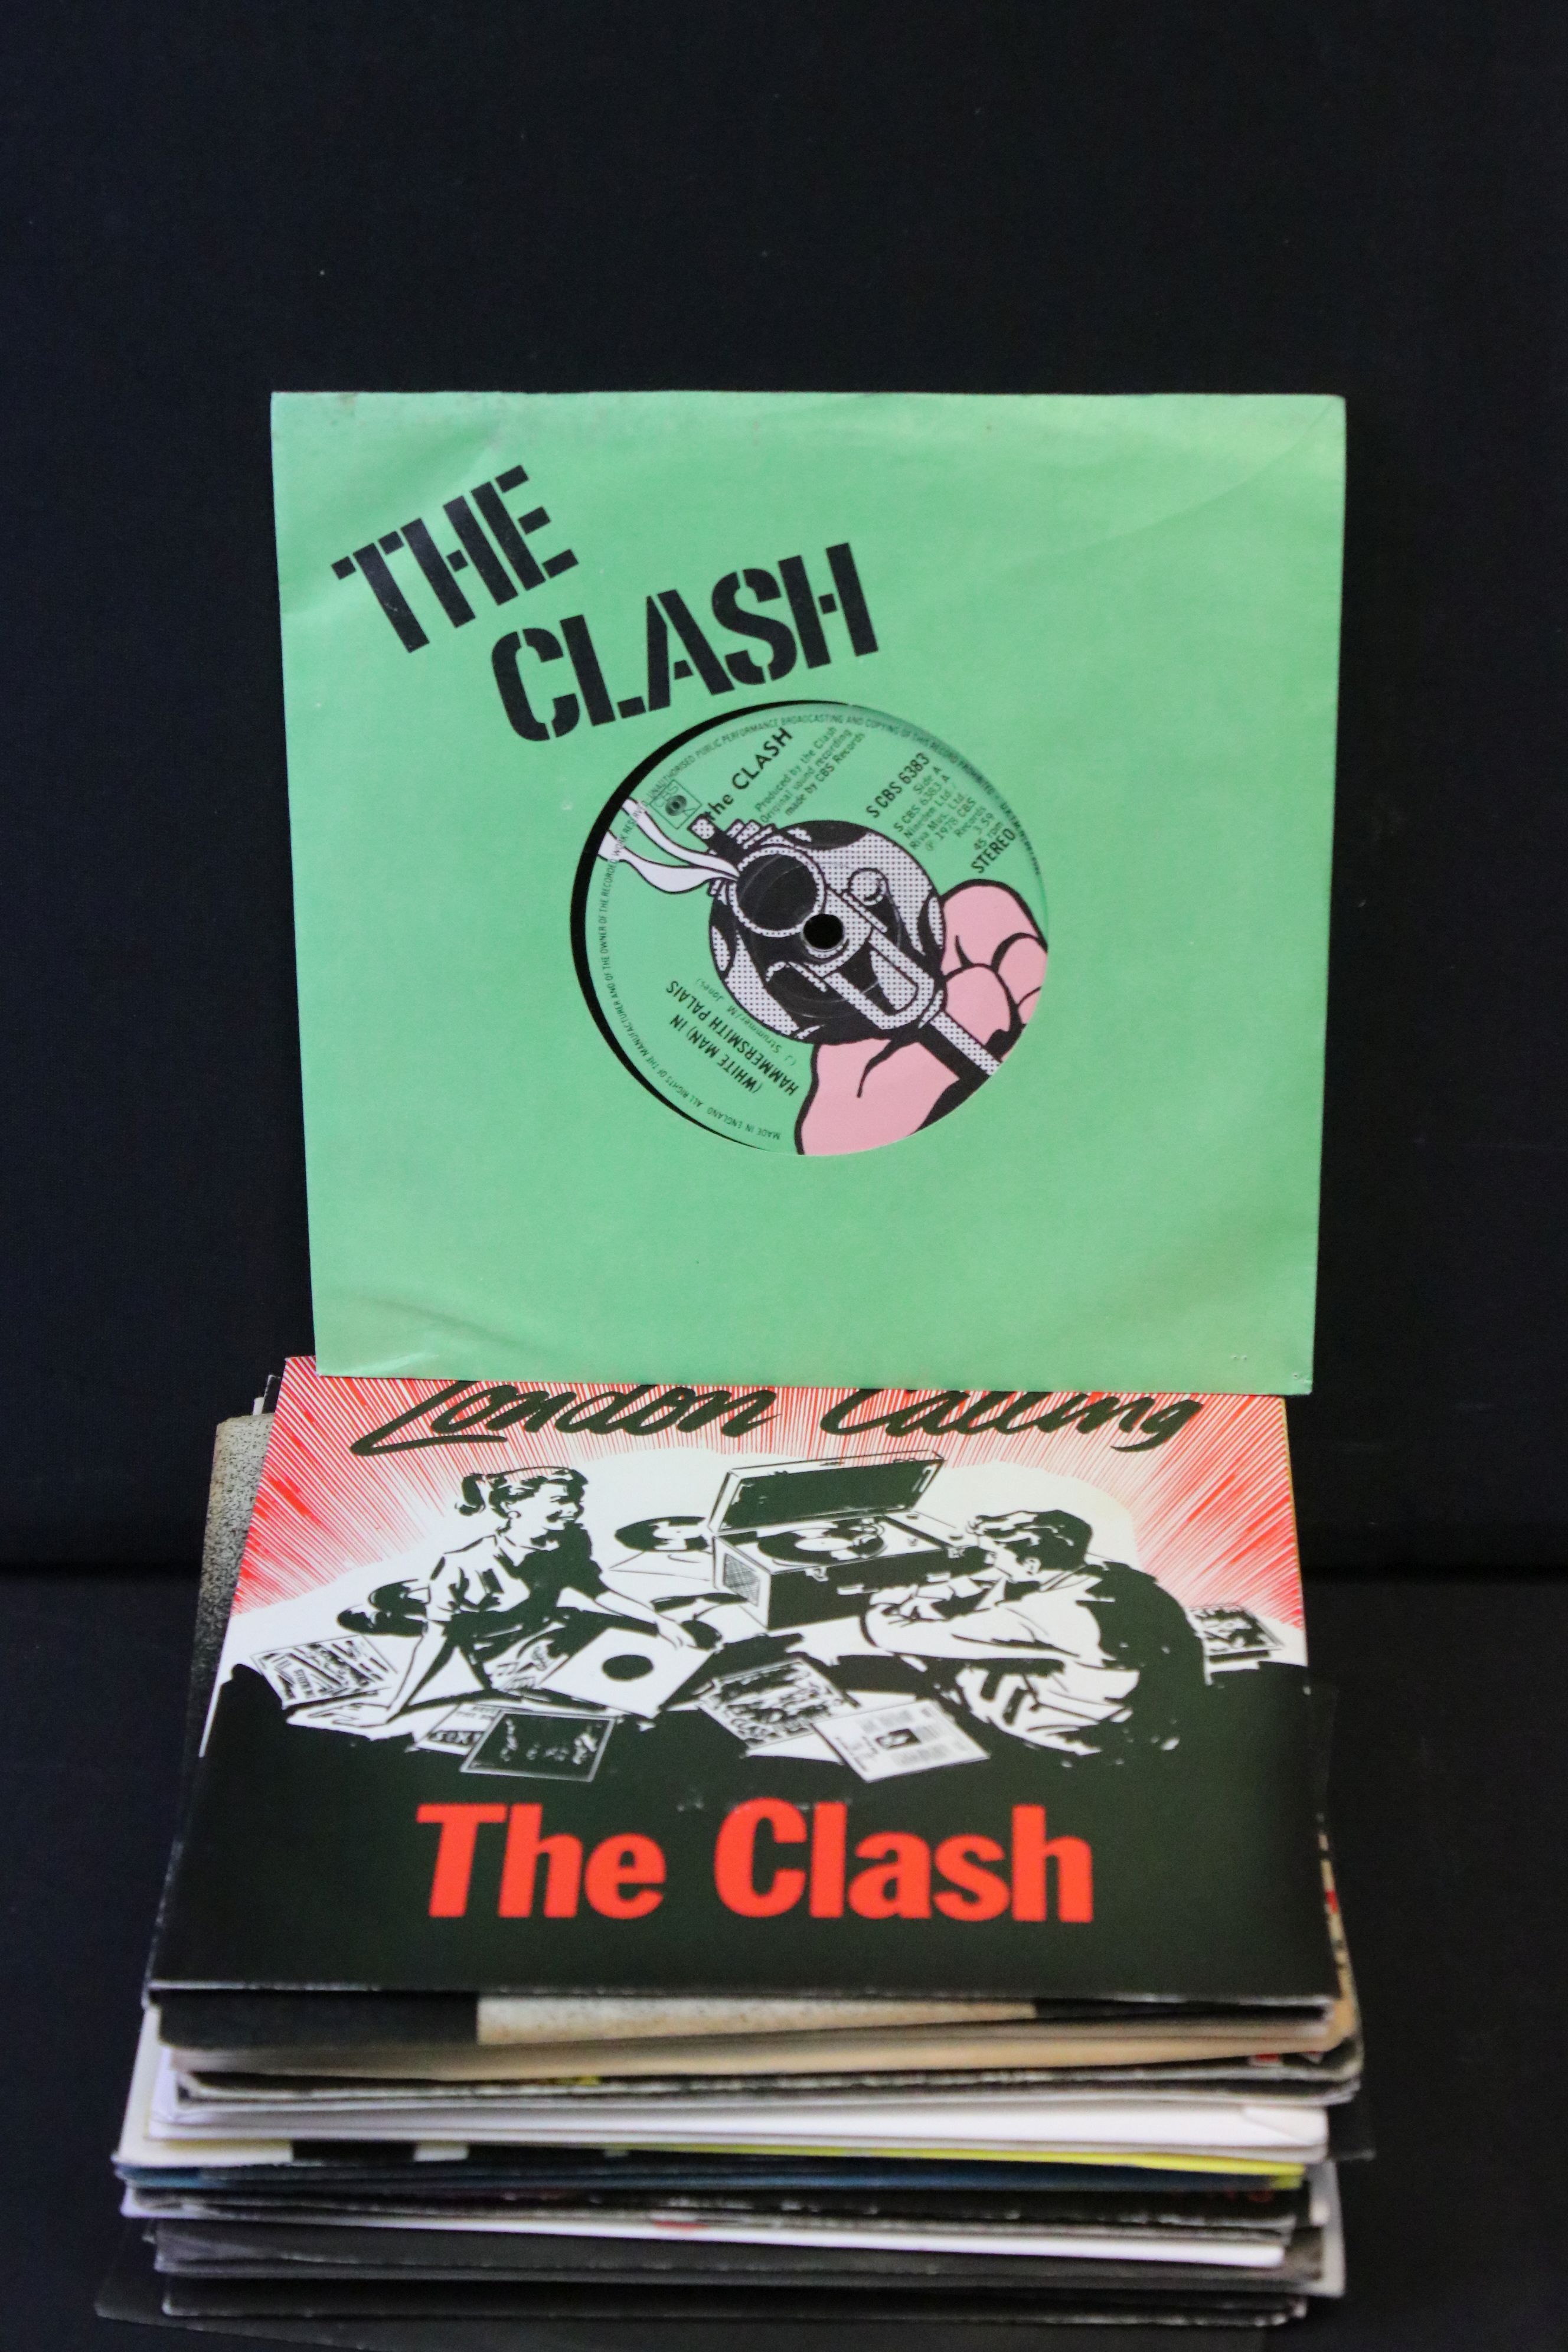 Vinyl - 27 Punk & New Wave 7" singles to include The Clash x 3, The Adverts, Ramones x 2, Sex